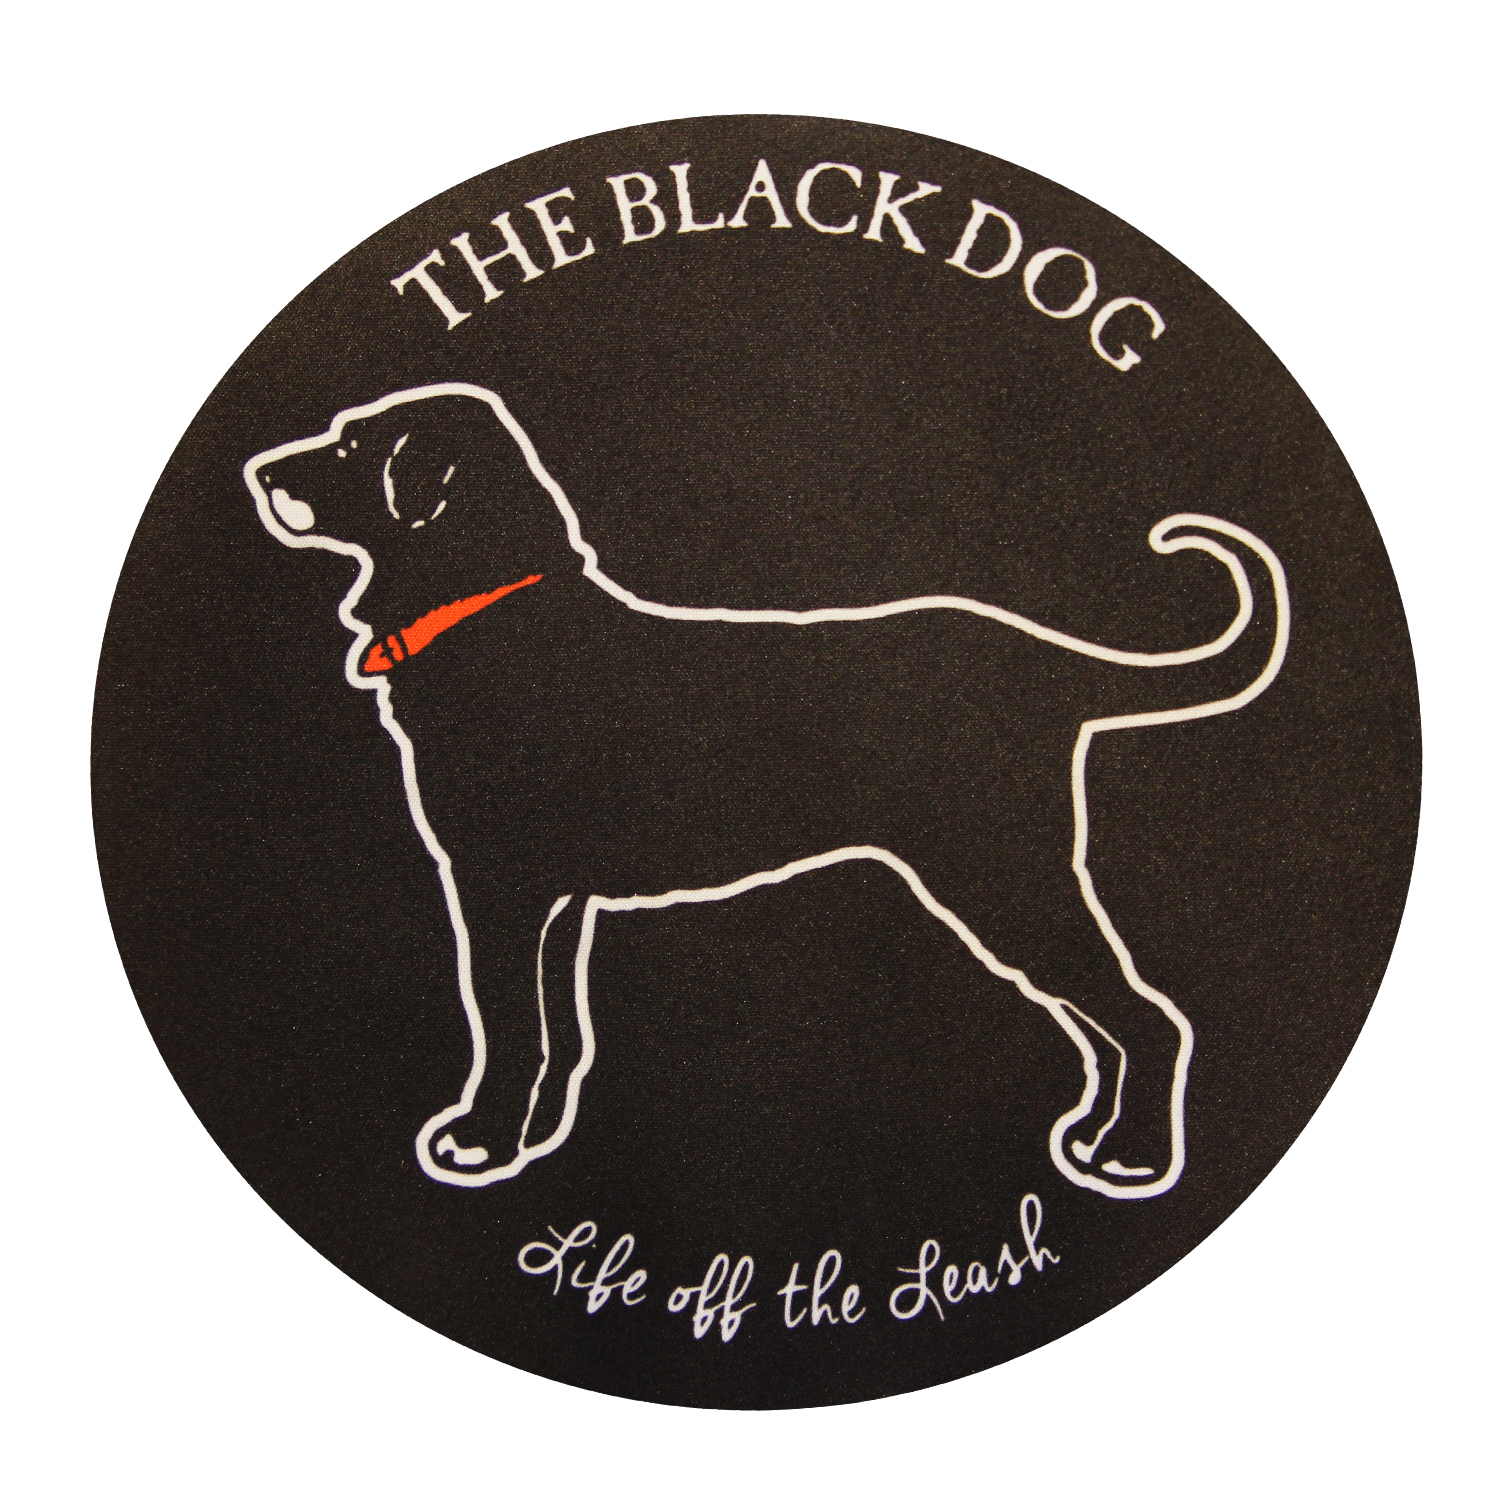 The Black Dog was founded as a tavern and restaurant in 1971